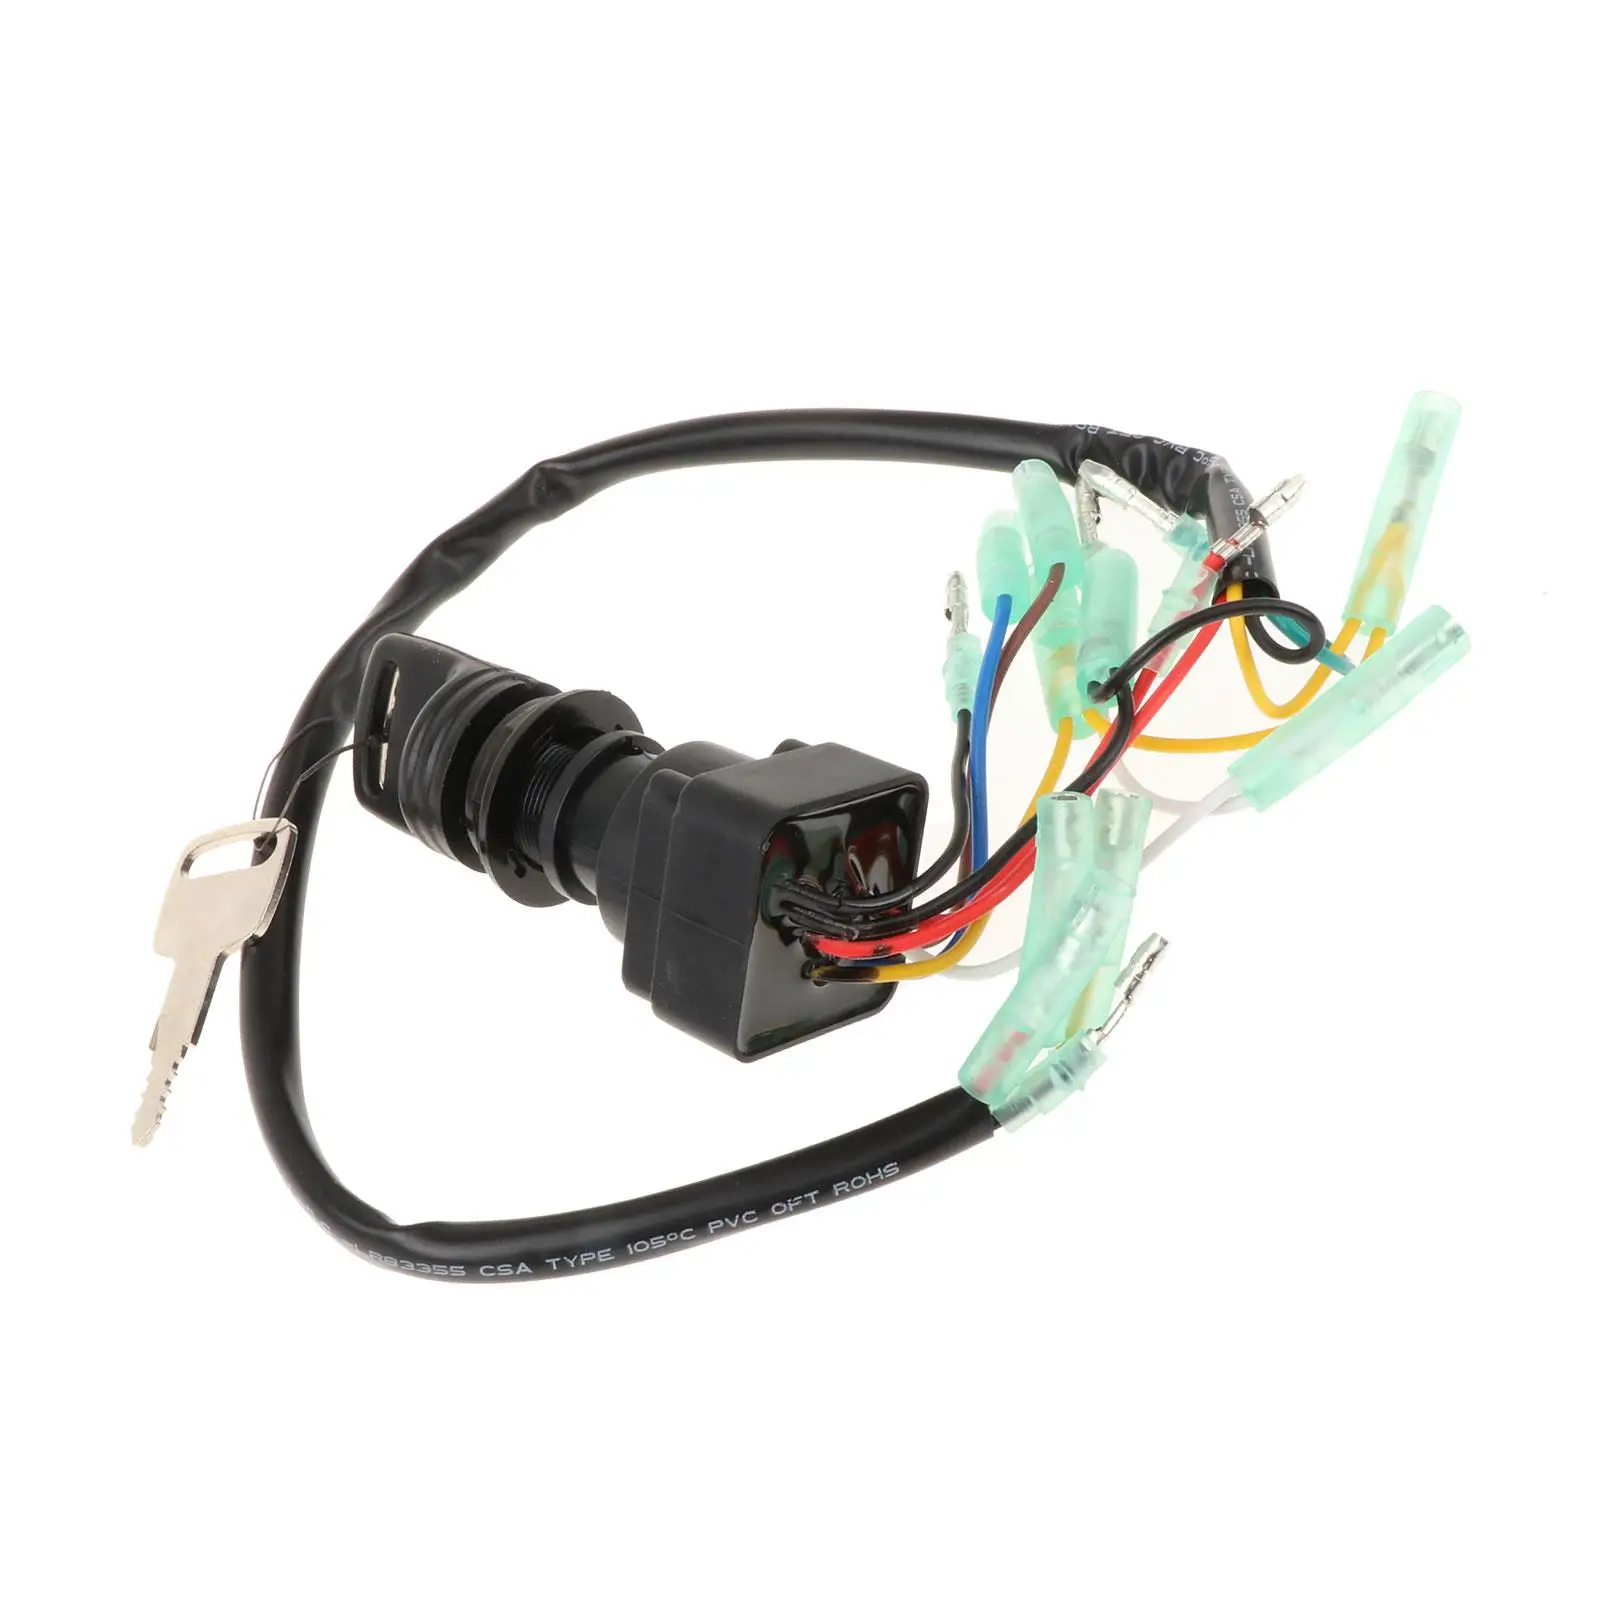 

Ignition Key Switch 703-82510-42 High Performance Replace for Yamaha Outboard Motor Control Box Accessories